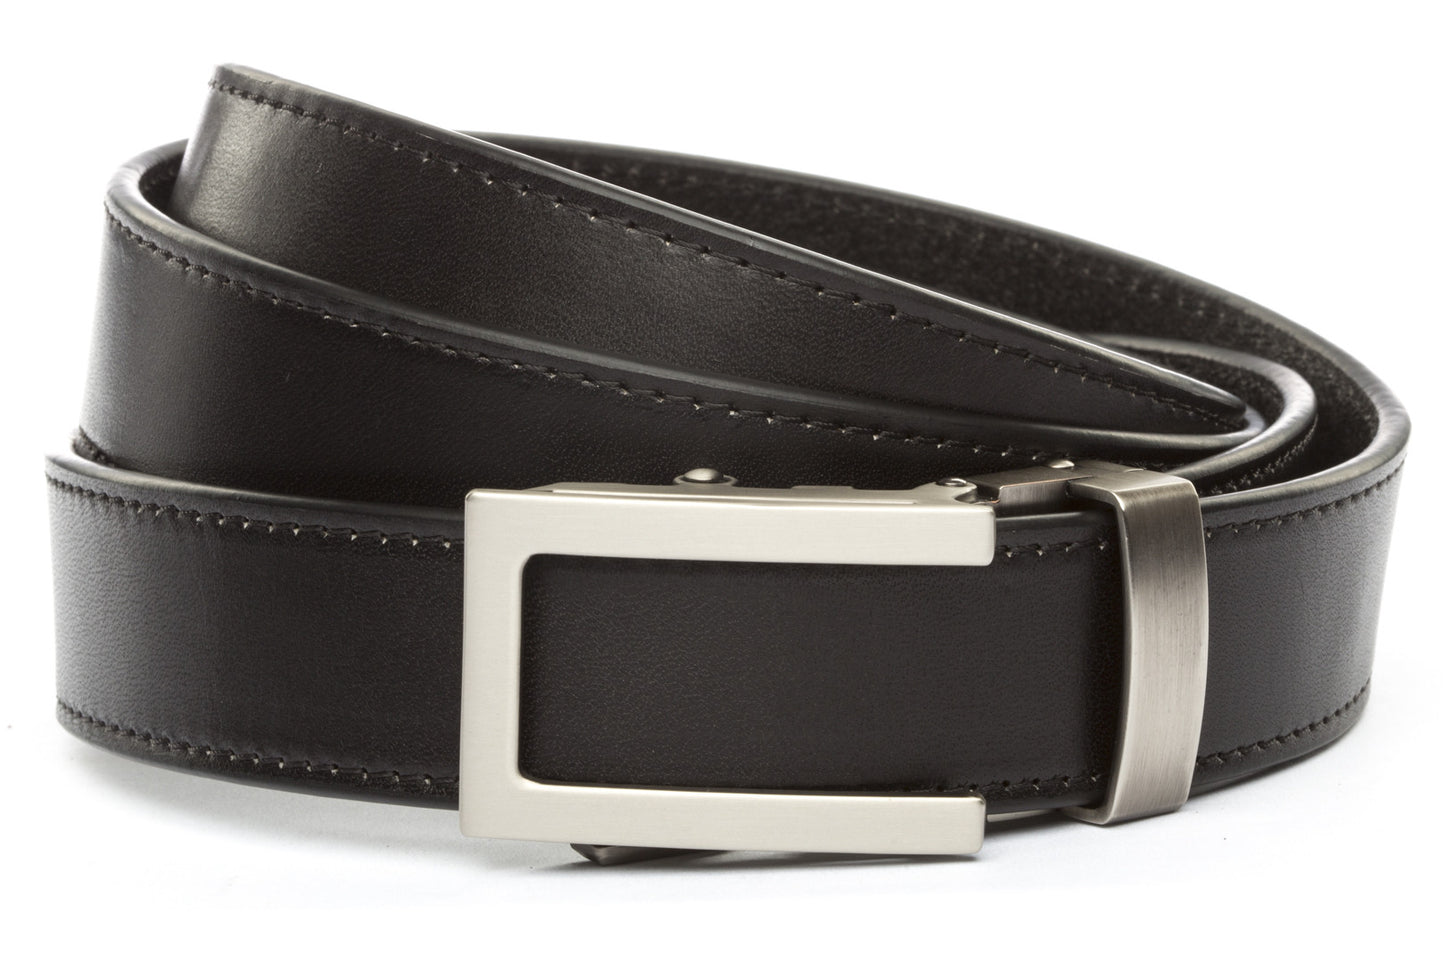 Black Vegetable Tanned Leather w/Traditional in Gunmetal Buckle (1.25") - Anson Belt & Buckle